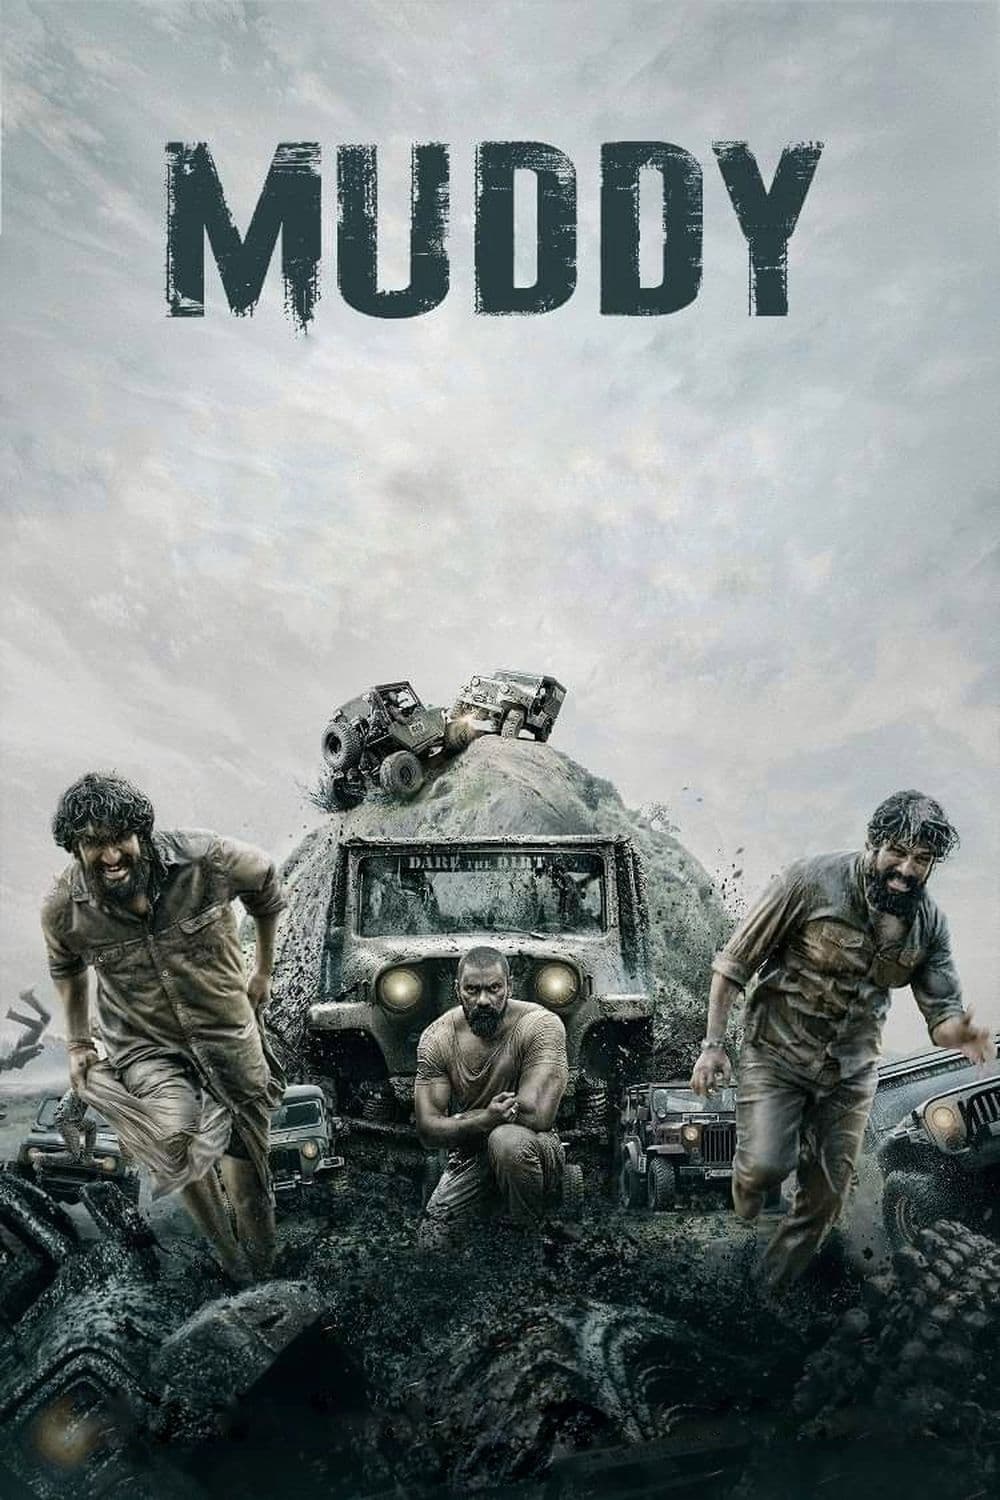 Poster for the movie "Muddy"